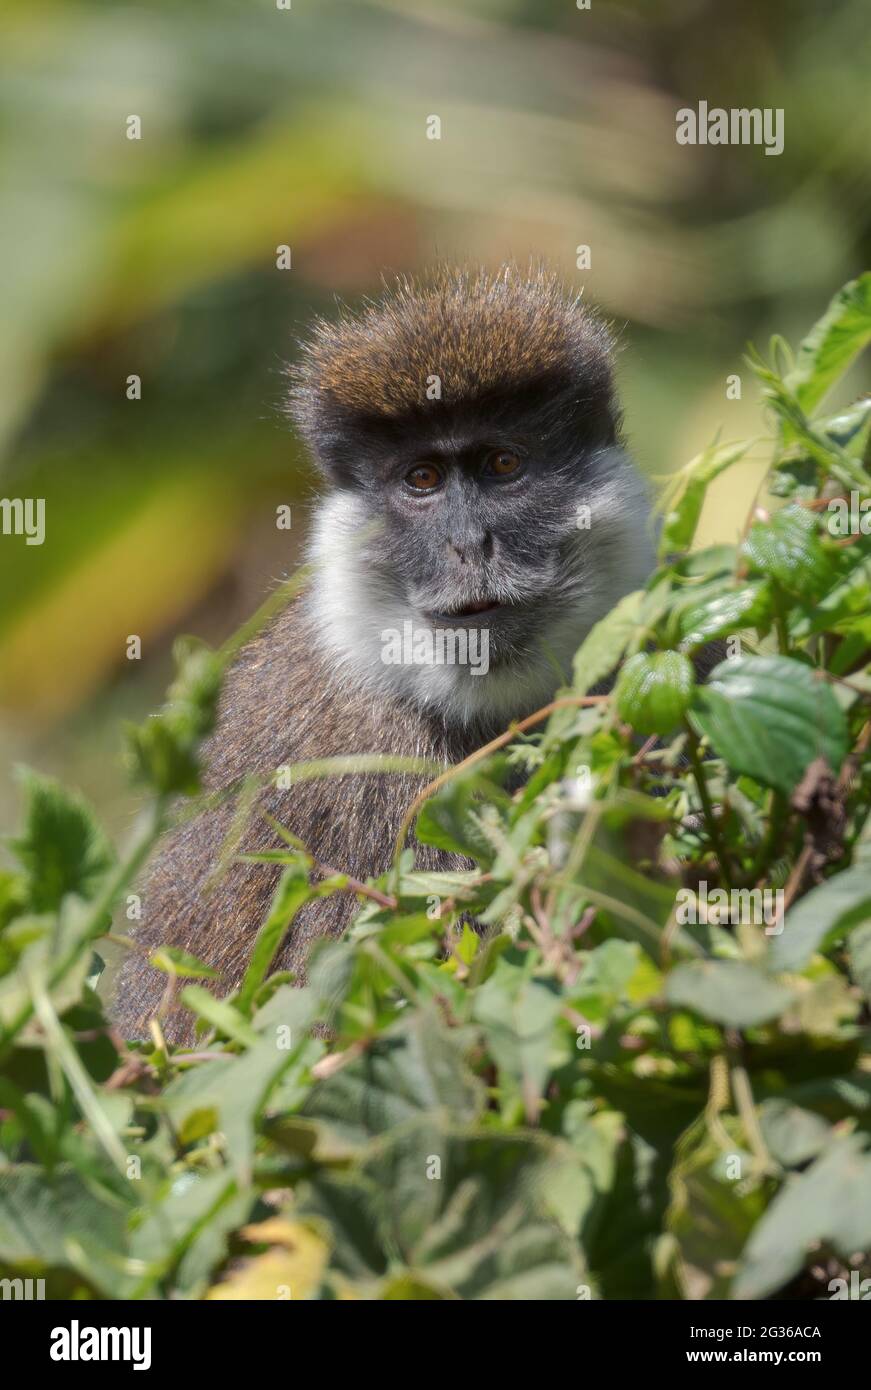 Bale Mountains Monkey - Chlorocebus djamdjamensis, endemic endangered primate from Bale mountains and Harrena forest, Ethiopia. Stock Photo